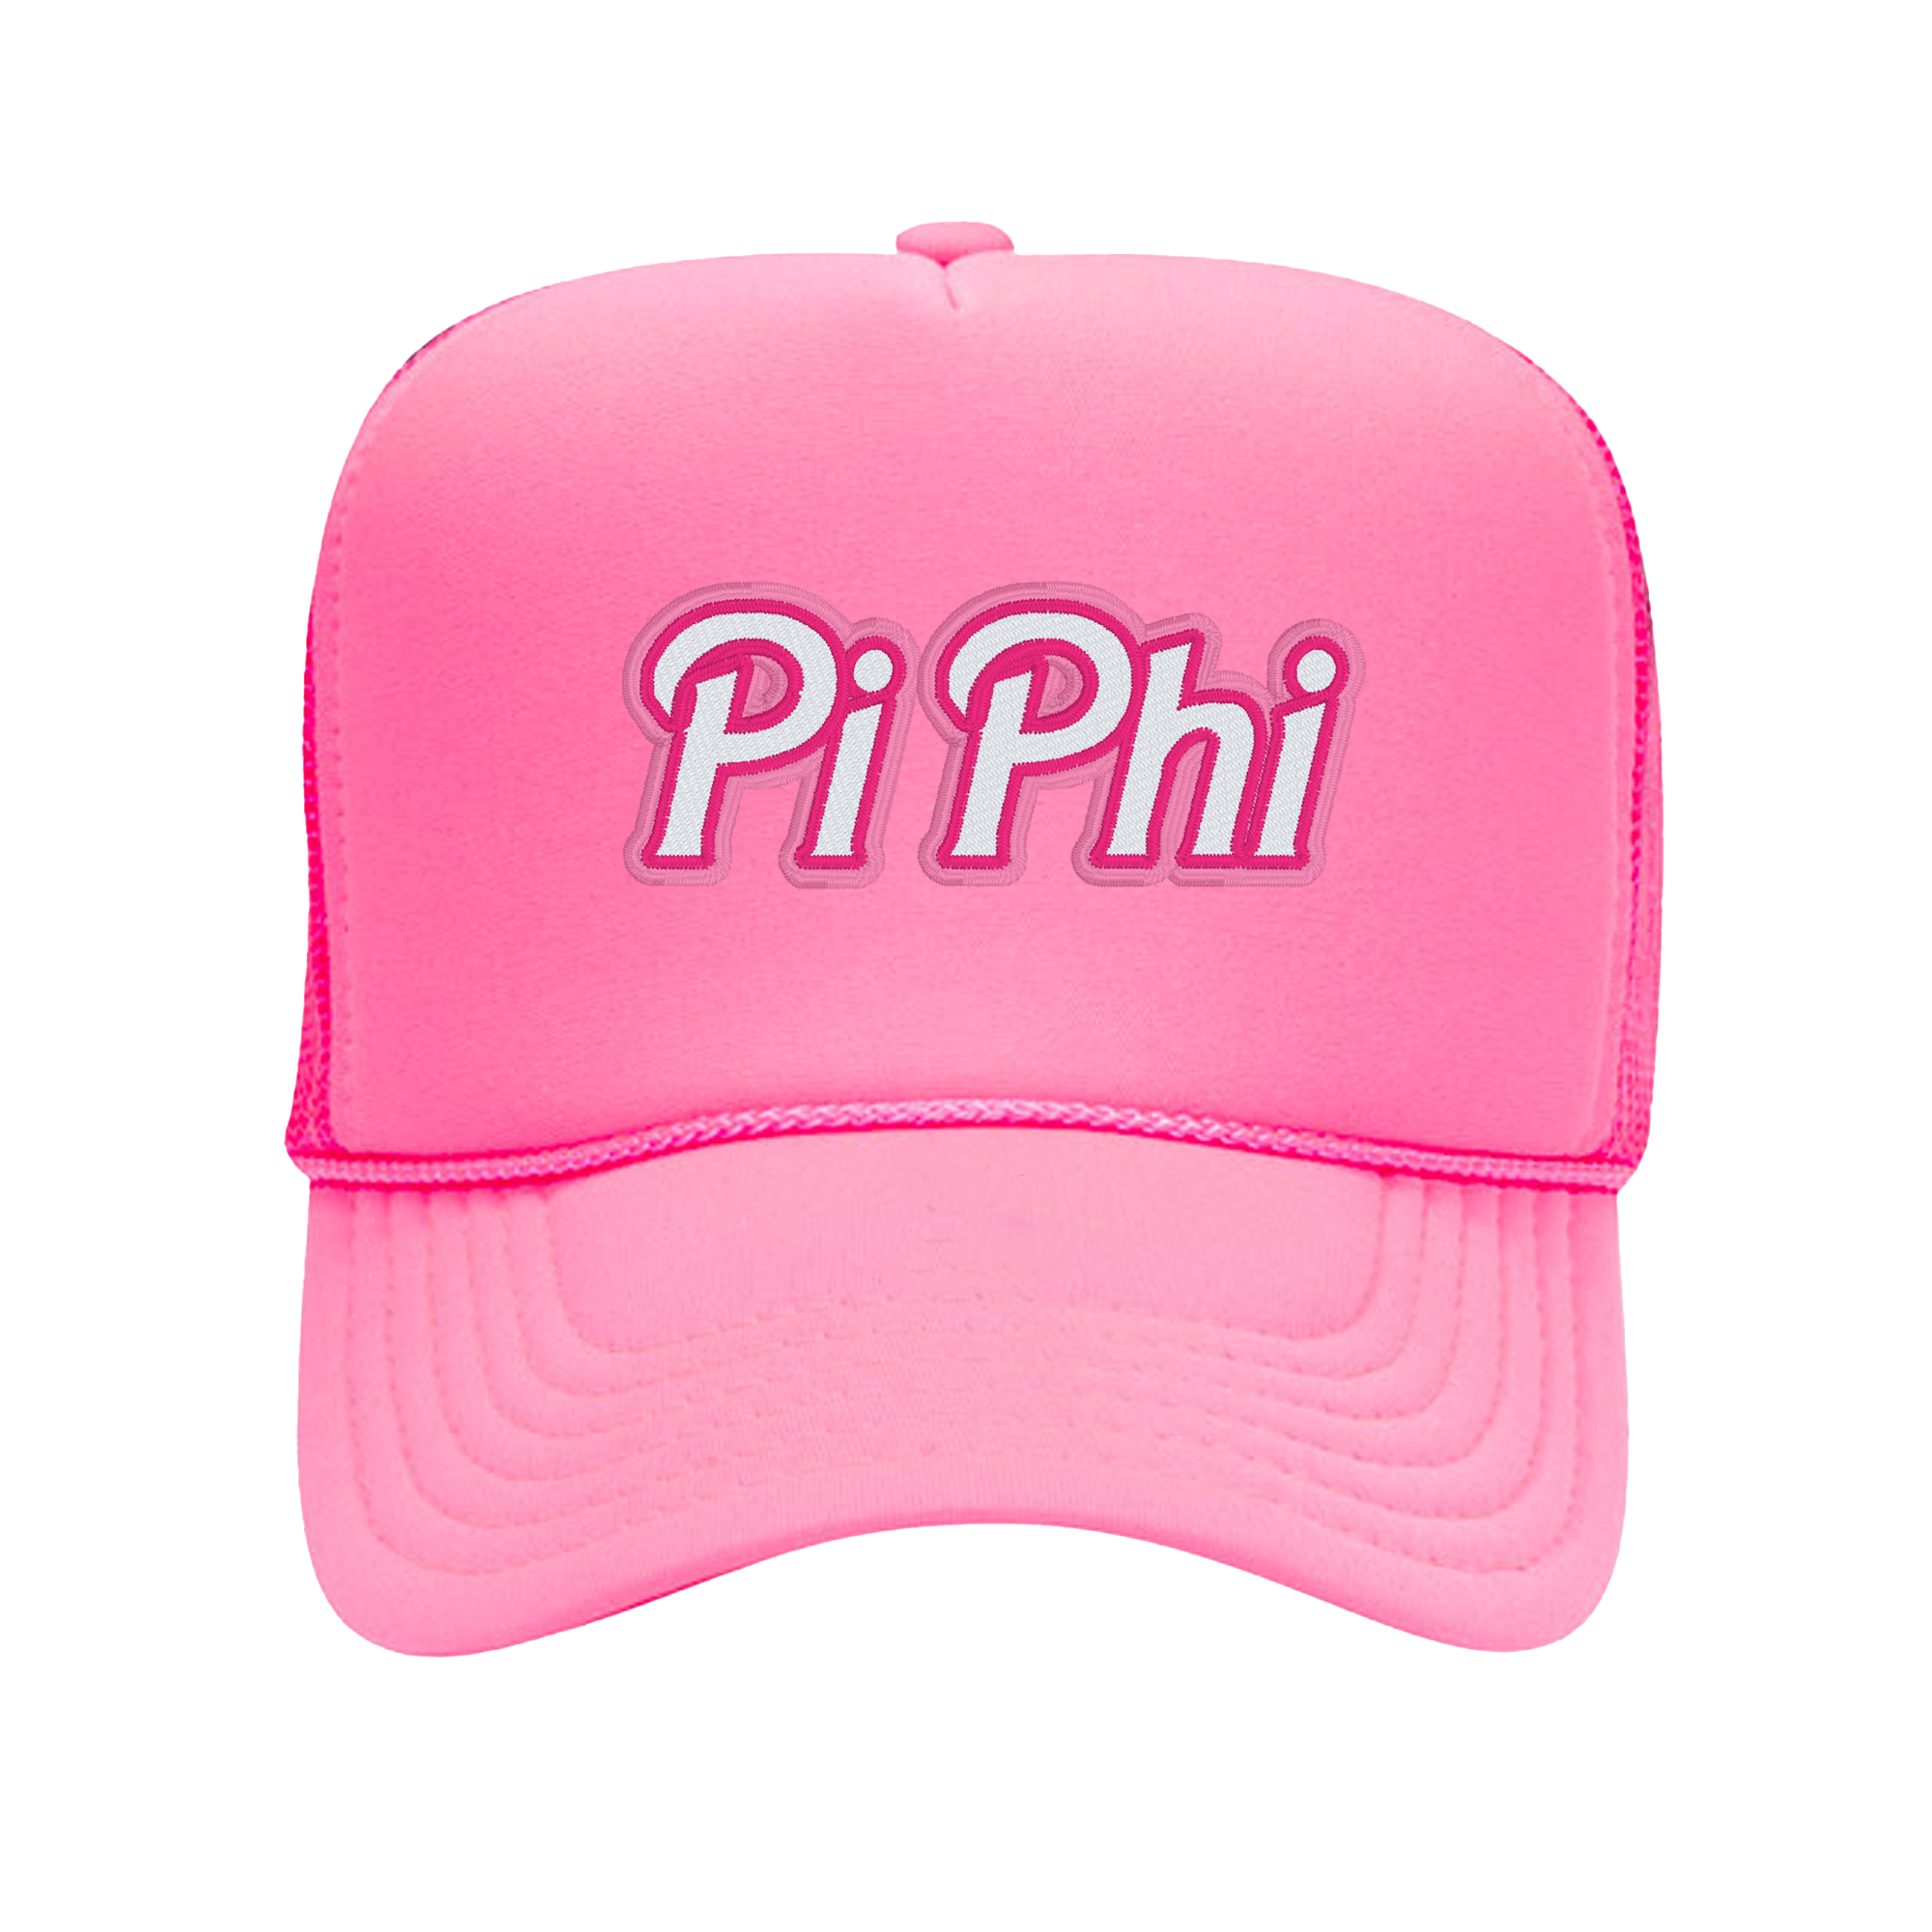 a pink hat with the word pi phi on it